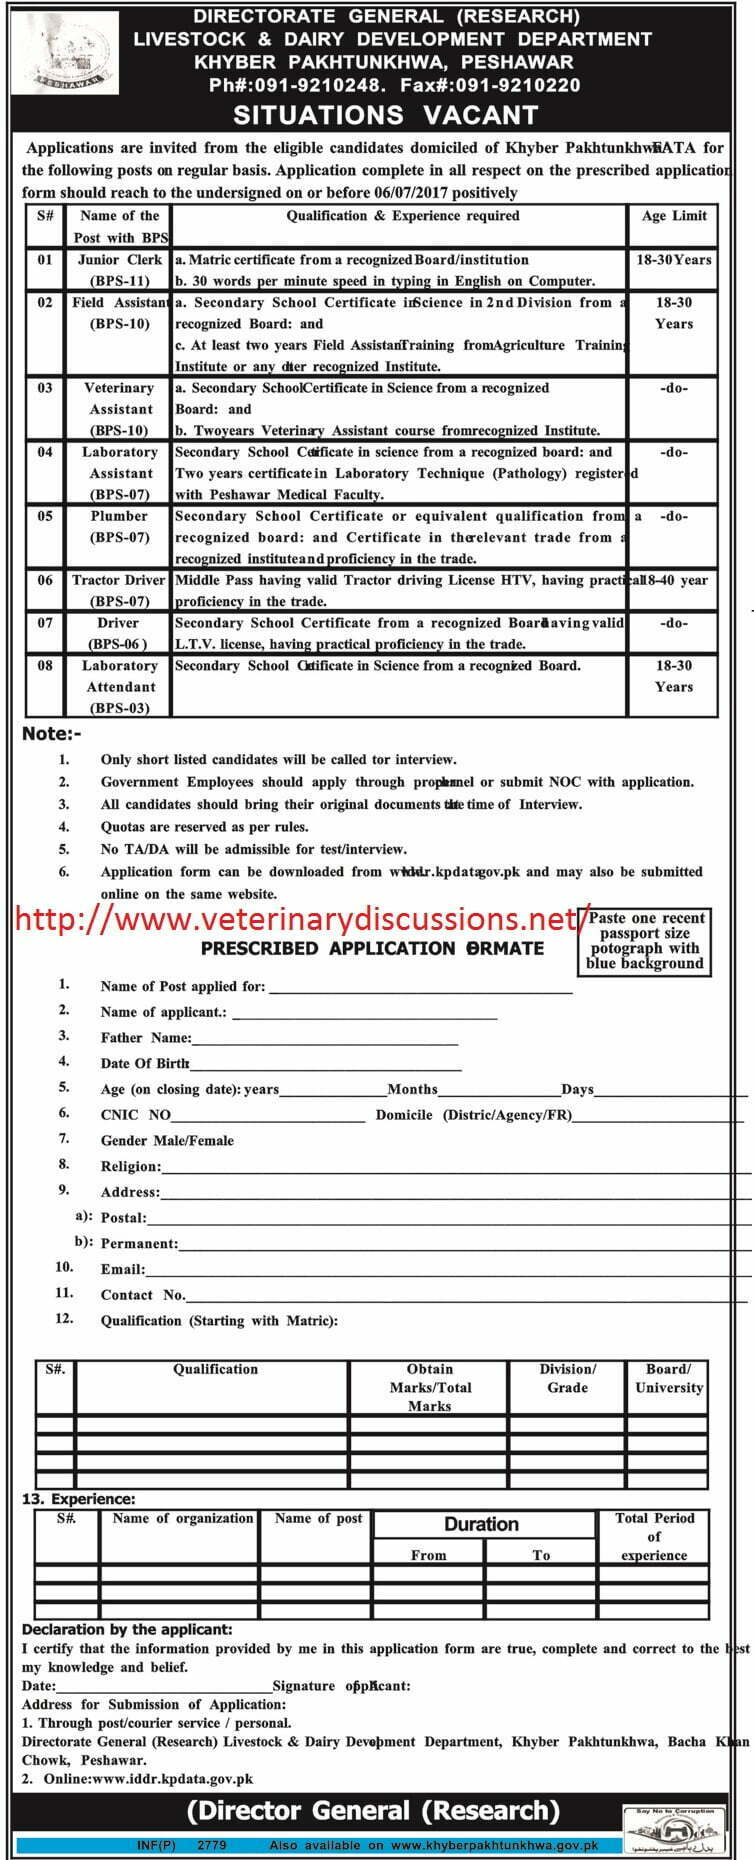 Veterinary Assistants required by KPK